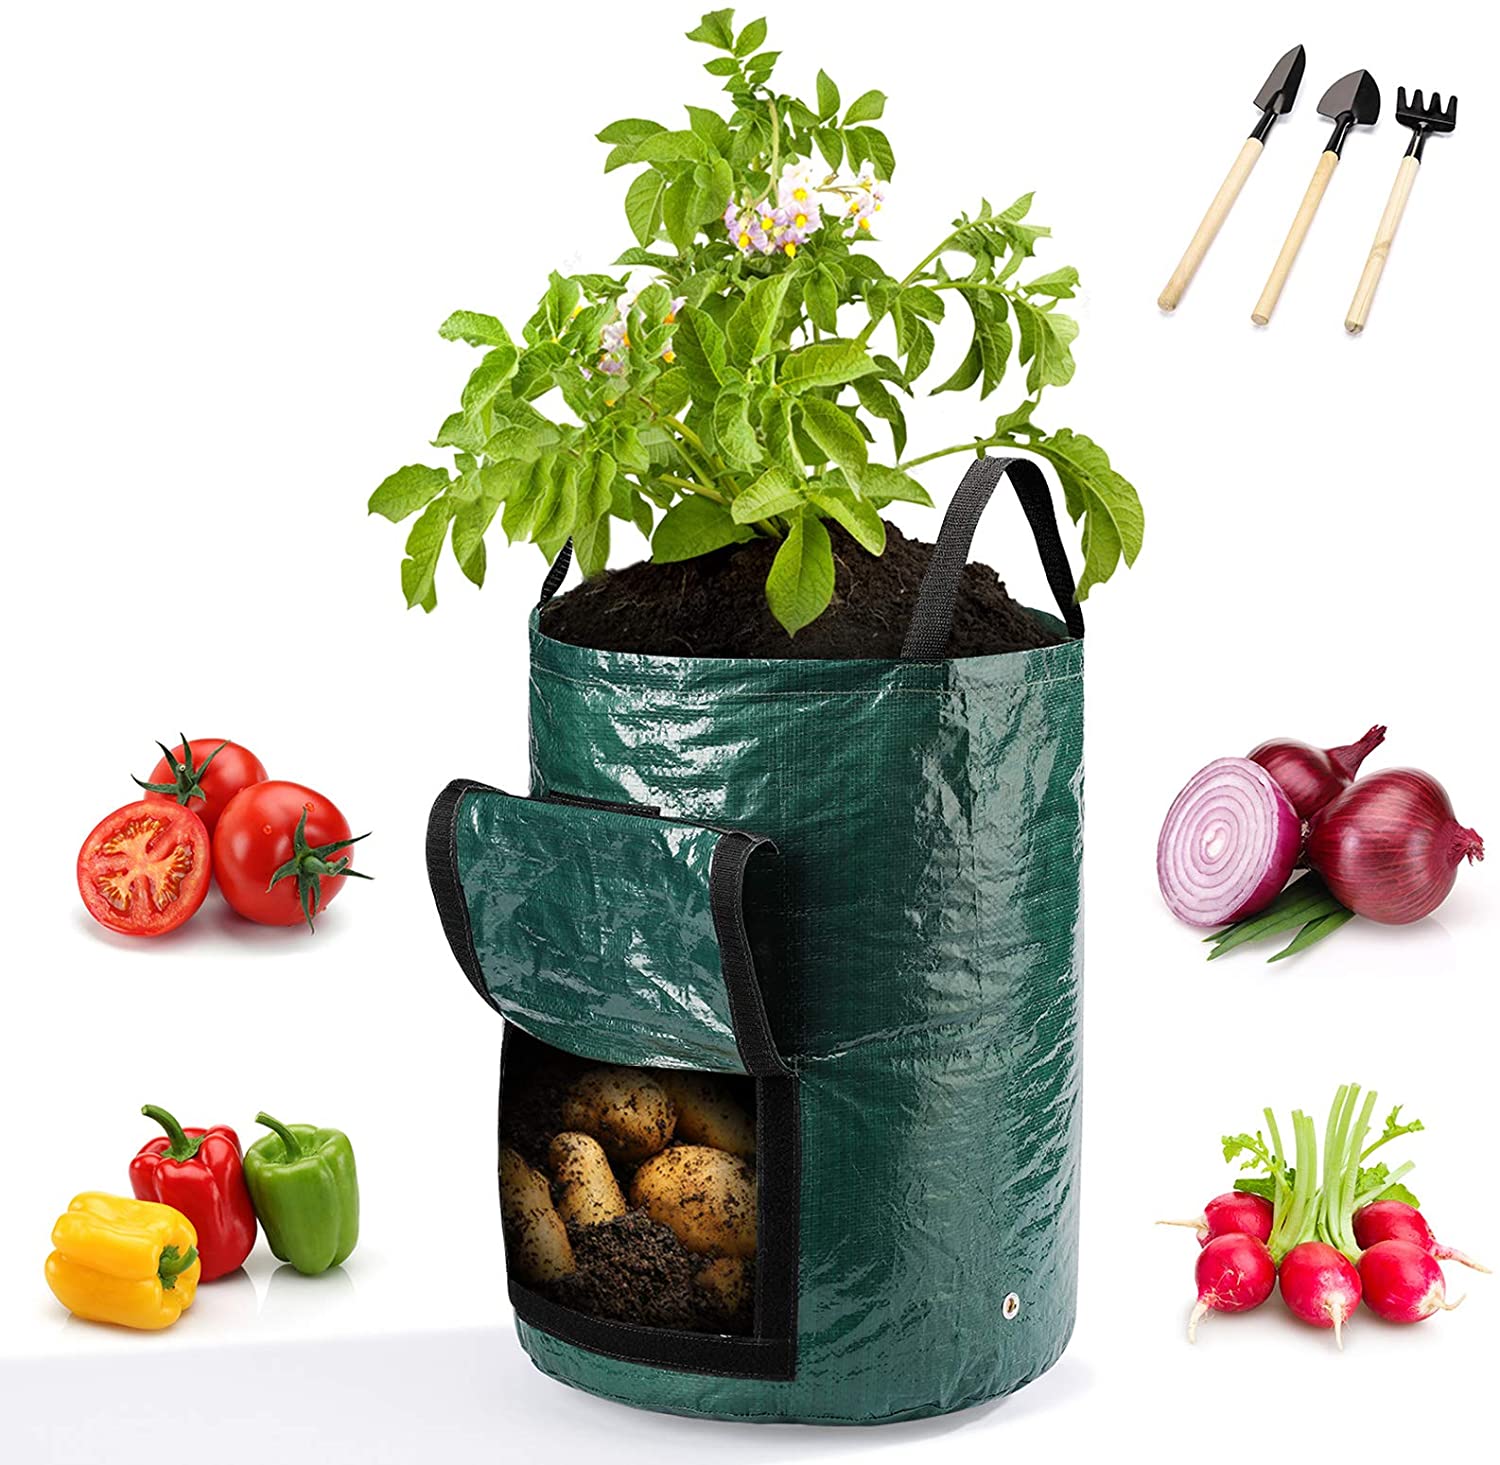 (70% off)Potato Grow Bags, Heavy Duty Thickened Vegetable Grow Pots with 3 Tools, Visualization Velcro Window Garden Grow Bags for Tomato,Carrot,Onion(4 Pack 10 Gallon) $8.96